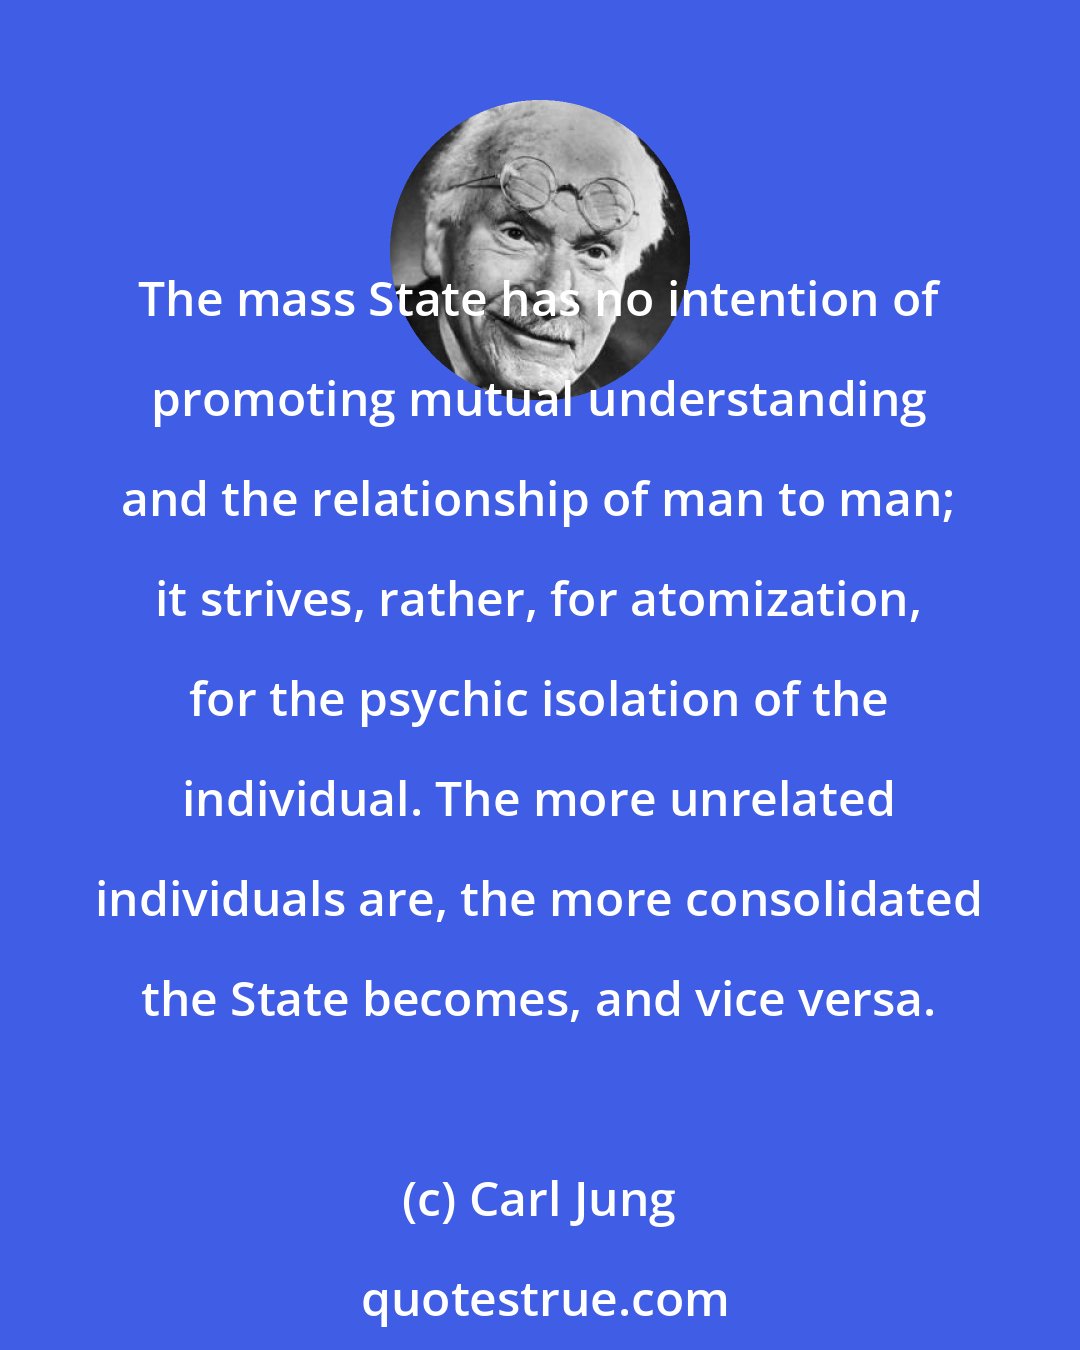 Carl Jung: The mass State has no intention of promoting mutual understanding and the relationship of man to man; it strives, rather, for atomization, for the psychic isolation of the individual. The more unrelated individuals are, the more consolidated the State becomes, and vice versa.